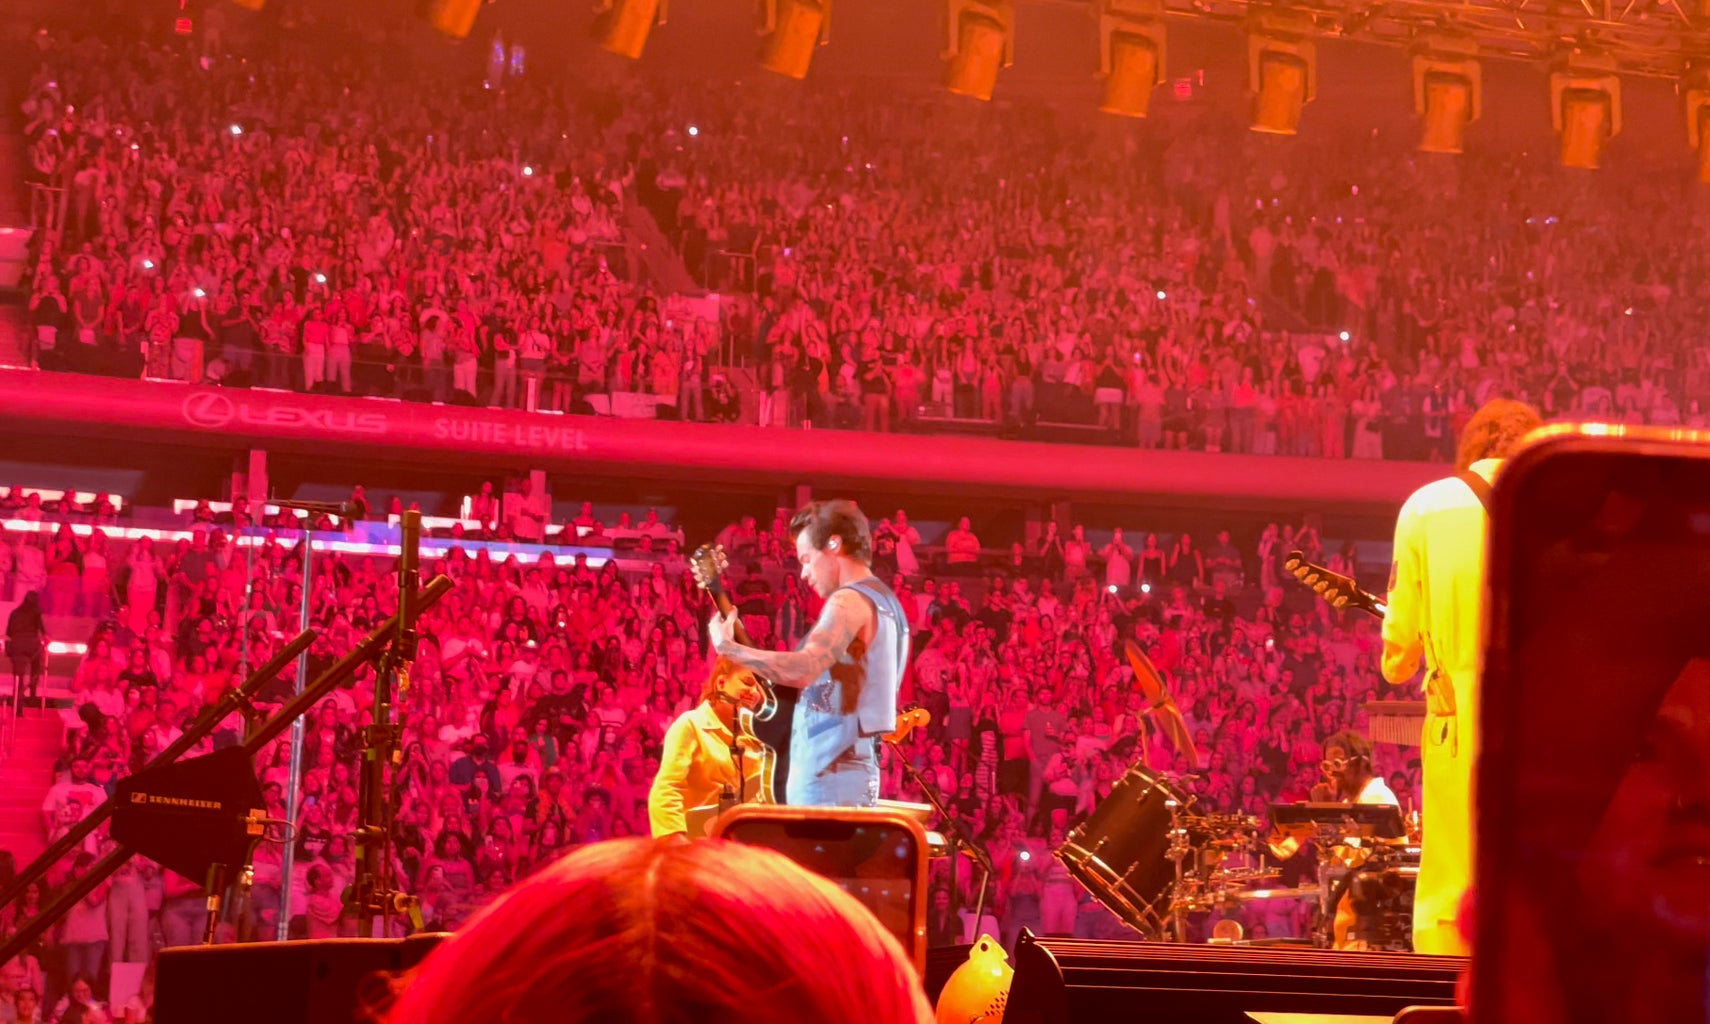 Harry Styles plays the guitar at Madison Square Garden on 8/28/2022